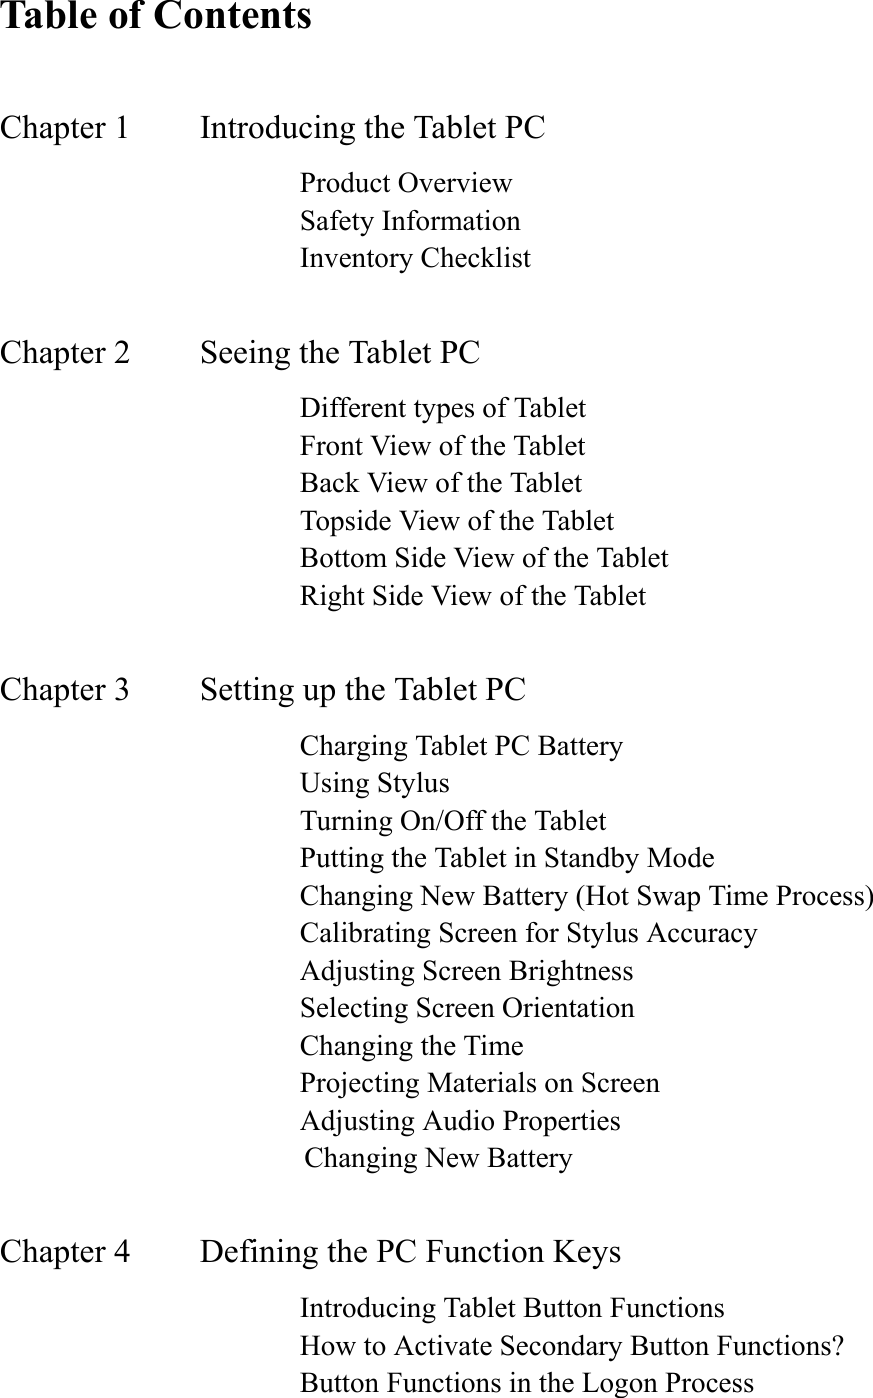 Table of ContentsChapter 1     Introducing the Tablet PC      Product Overview       Safety Information       Inventory Checklist Chapter 2    Seeing the Tablet PC                 Different types of Tablet         Front View of the Tablet       Back View of the Tablet       Topside View of the Tablet       Bottom Side View of the Tablet       Right Side View of the Tablet Chapter 3     Setting up the Tablet PC      Charging Tablet PC Battery       Using Stylus       Turning On/Off the Tablet       Putting the Tablet in Standby Mode       Changing New Battery (Hot Swap Time Process)       Calibrating Screen for Stylus Accuracy       Adjusting Screen Brightness       Selecting Screen Orientation       Changing the Time       Projecting Materials on Screen       Adjusting Audio Properties                      Changing New Battery Chapter 4    Defining the PC Function Keys       Introducing Tablet Button Functions       How to Activate Secondary Button Functions?       Button Functions in the Logon Process 